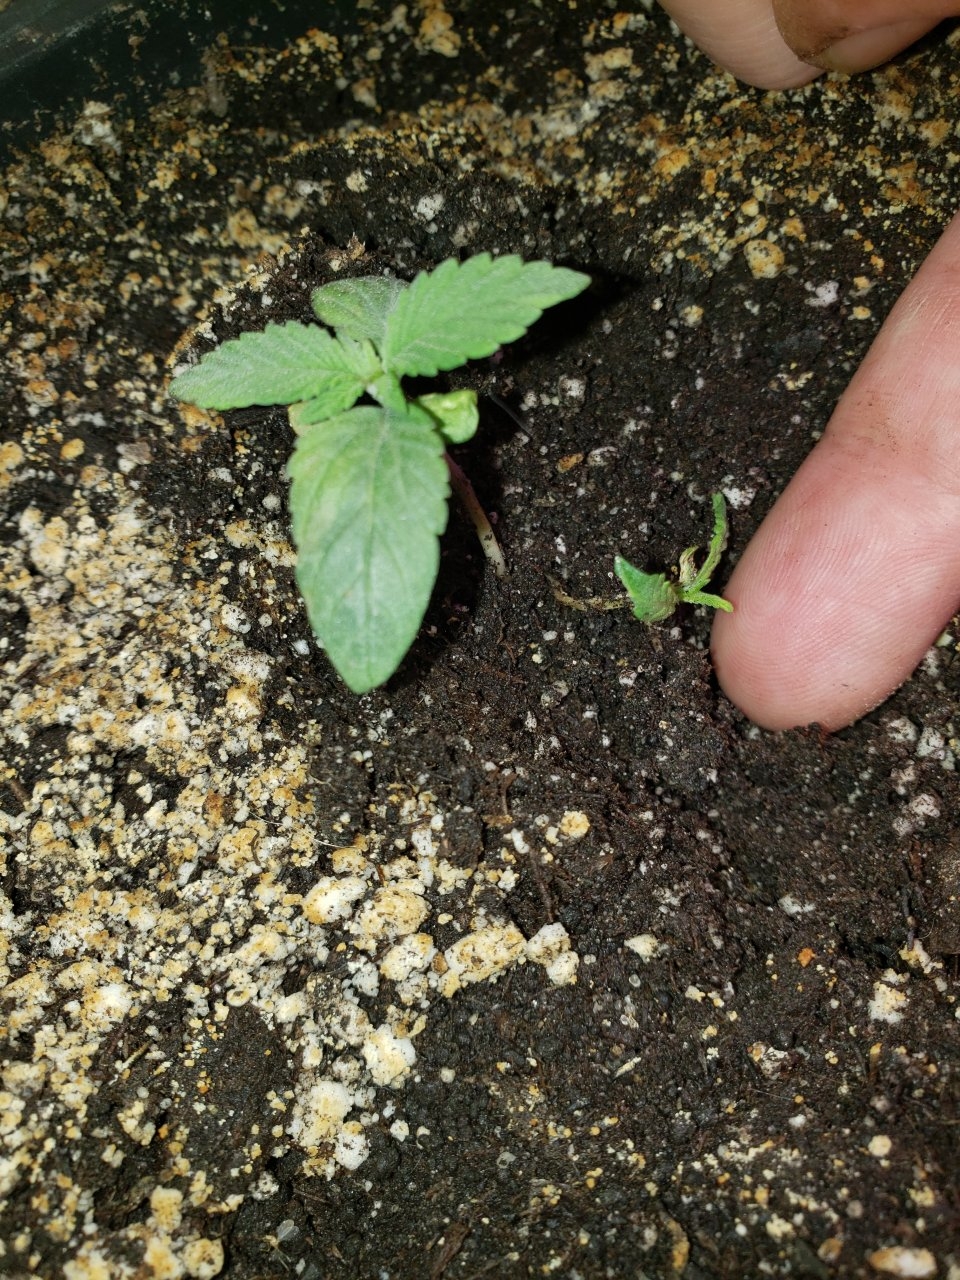 See looks like another seedling lol